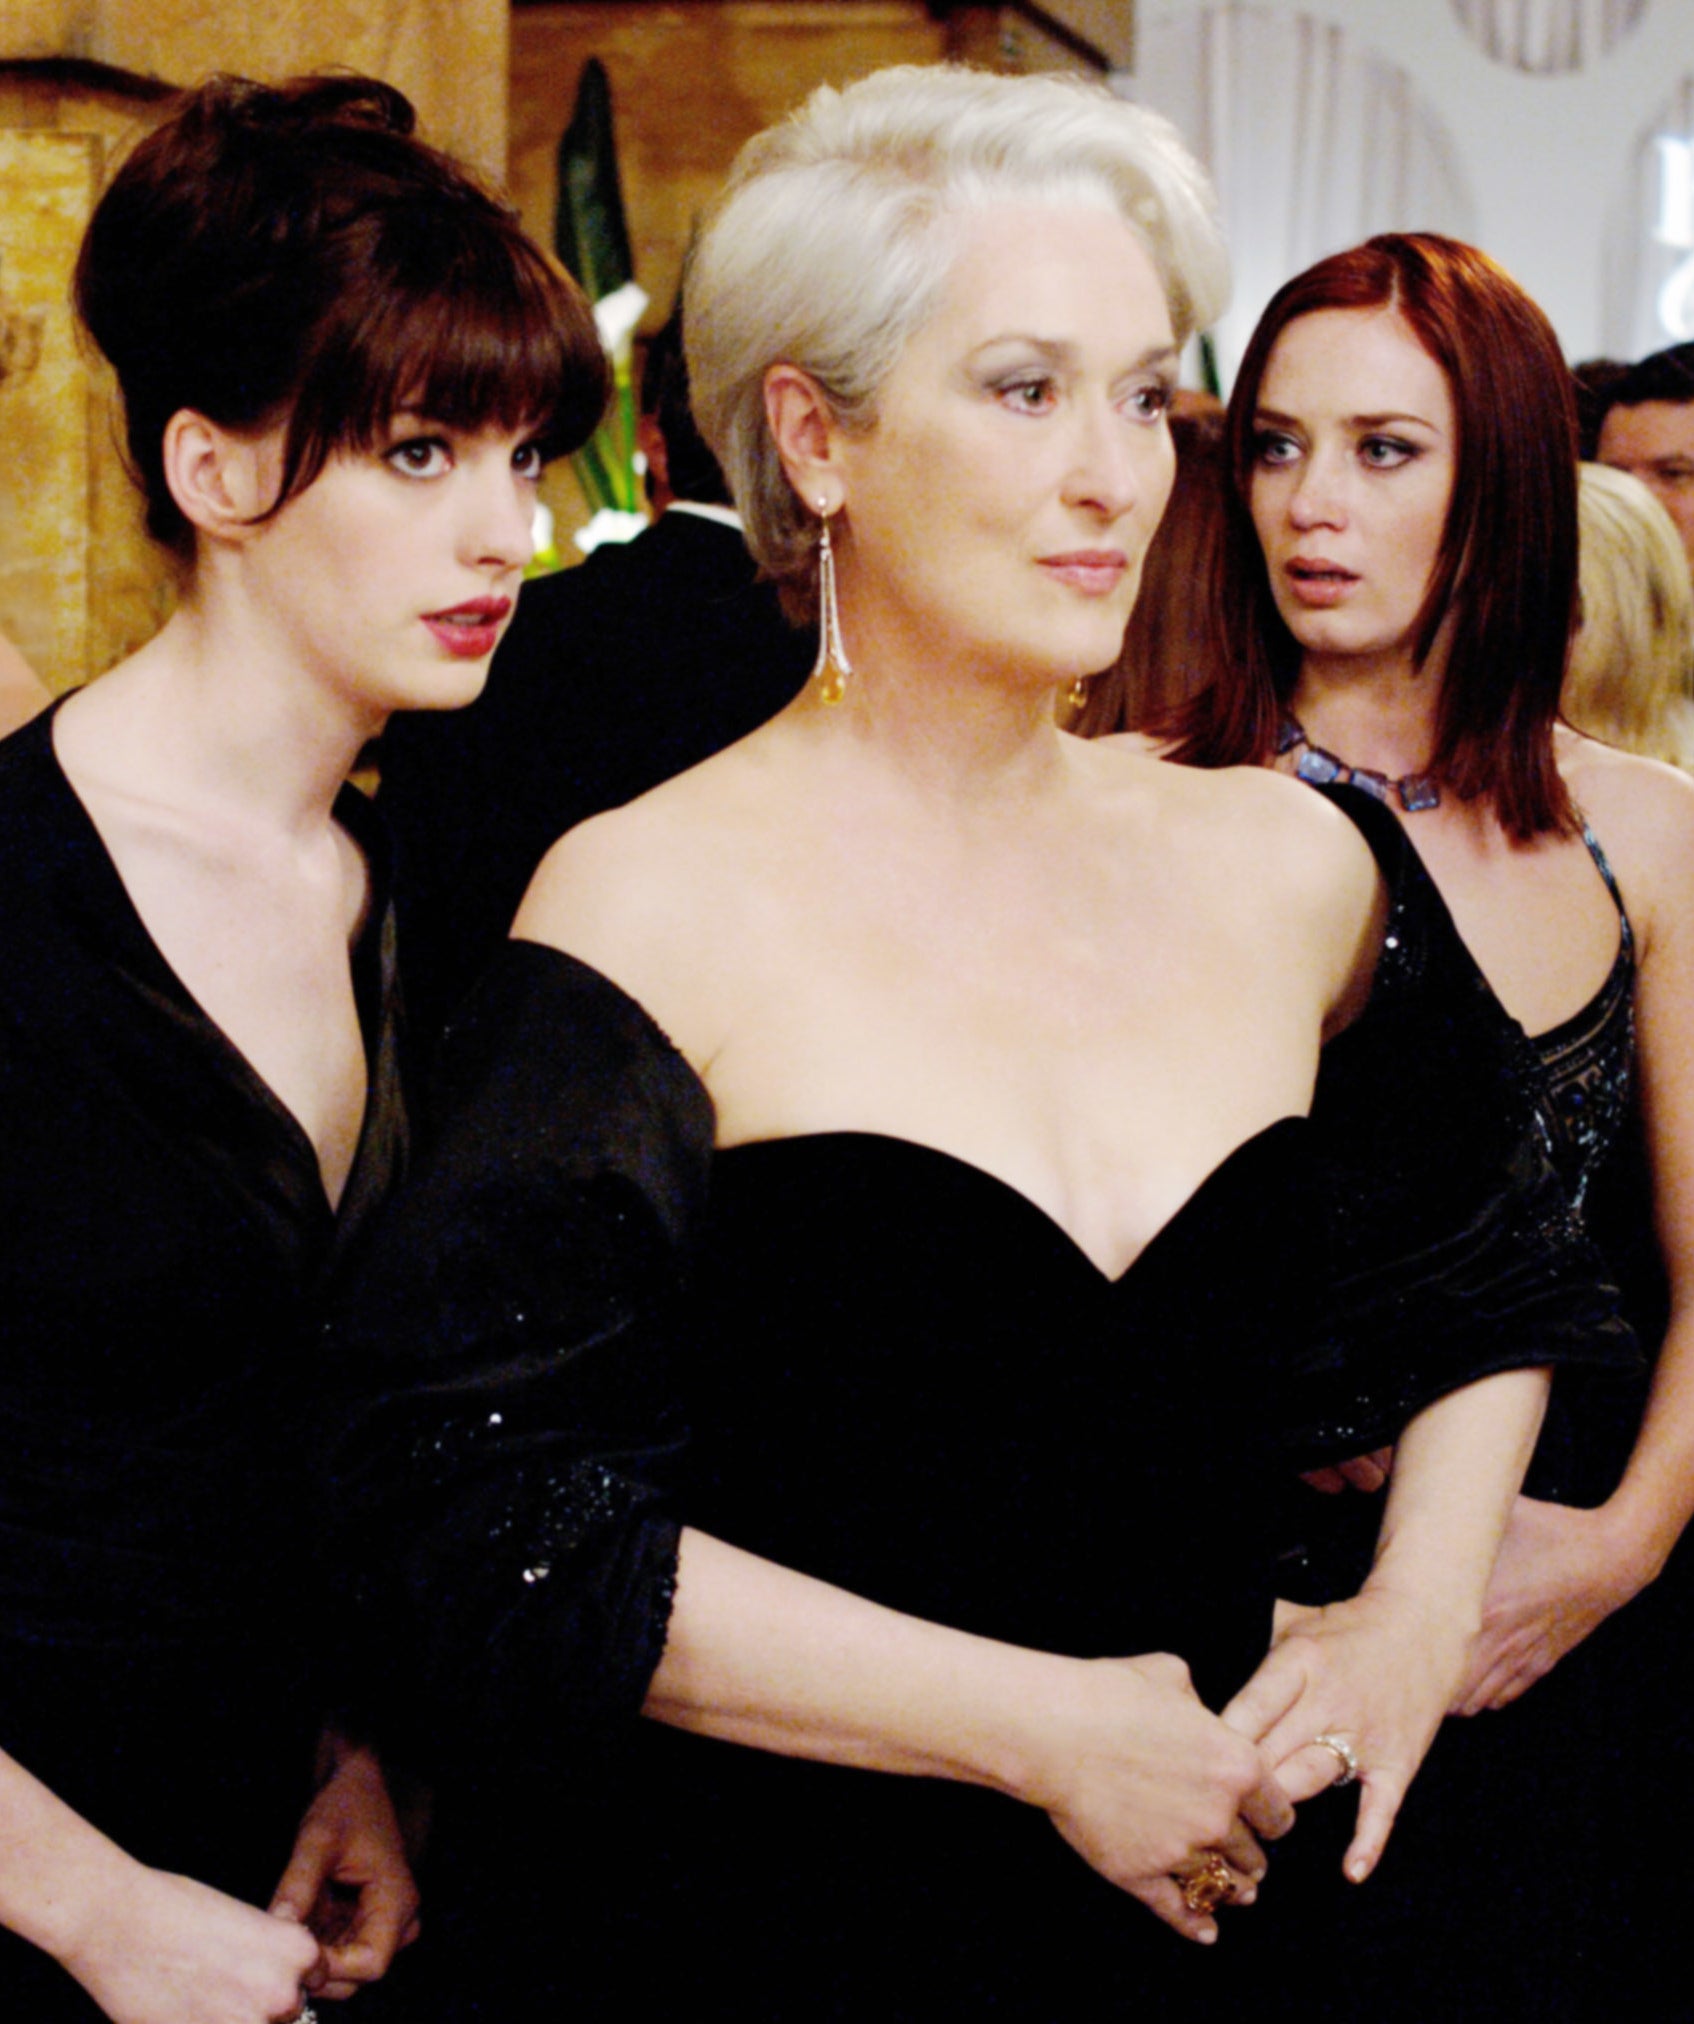 Anne Hathaway and Emily Blunt stand behind Meryl at a formal event in a scene from &quot;The Devil Wears Prada&quot;